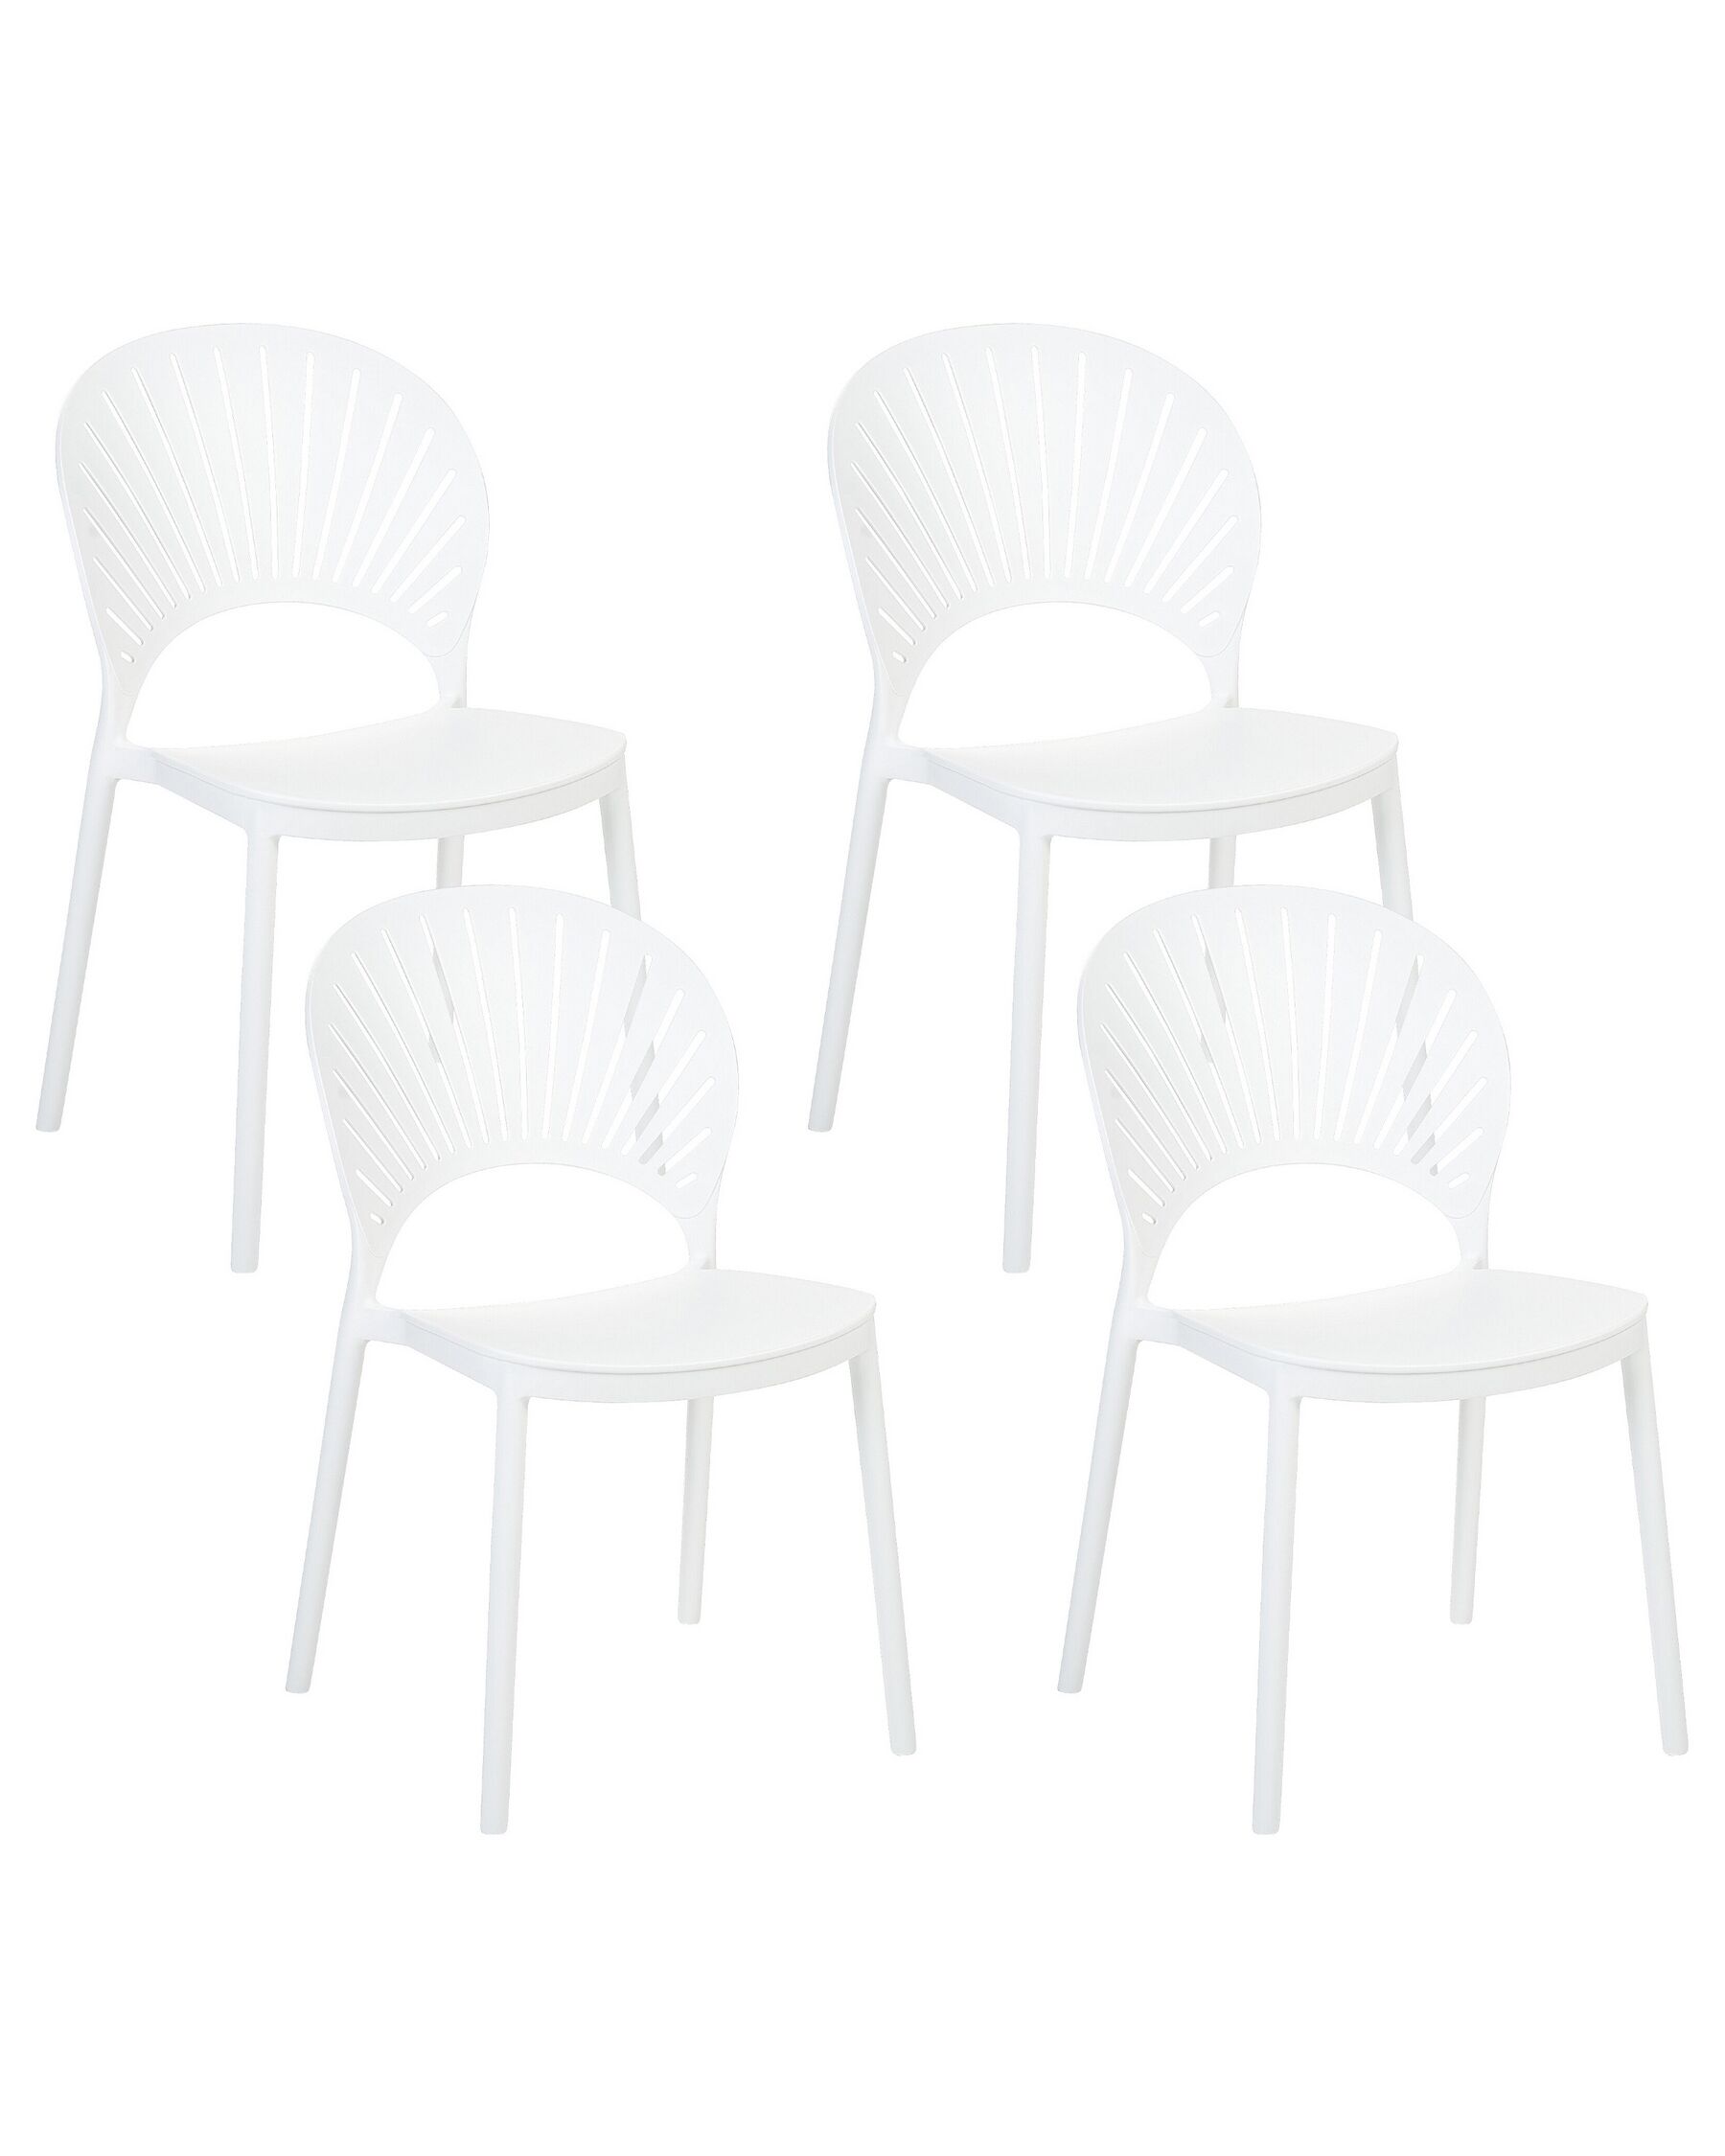 Set of 4 Plastic Dining Chairs White OSTIA_862726